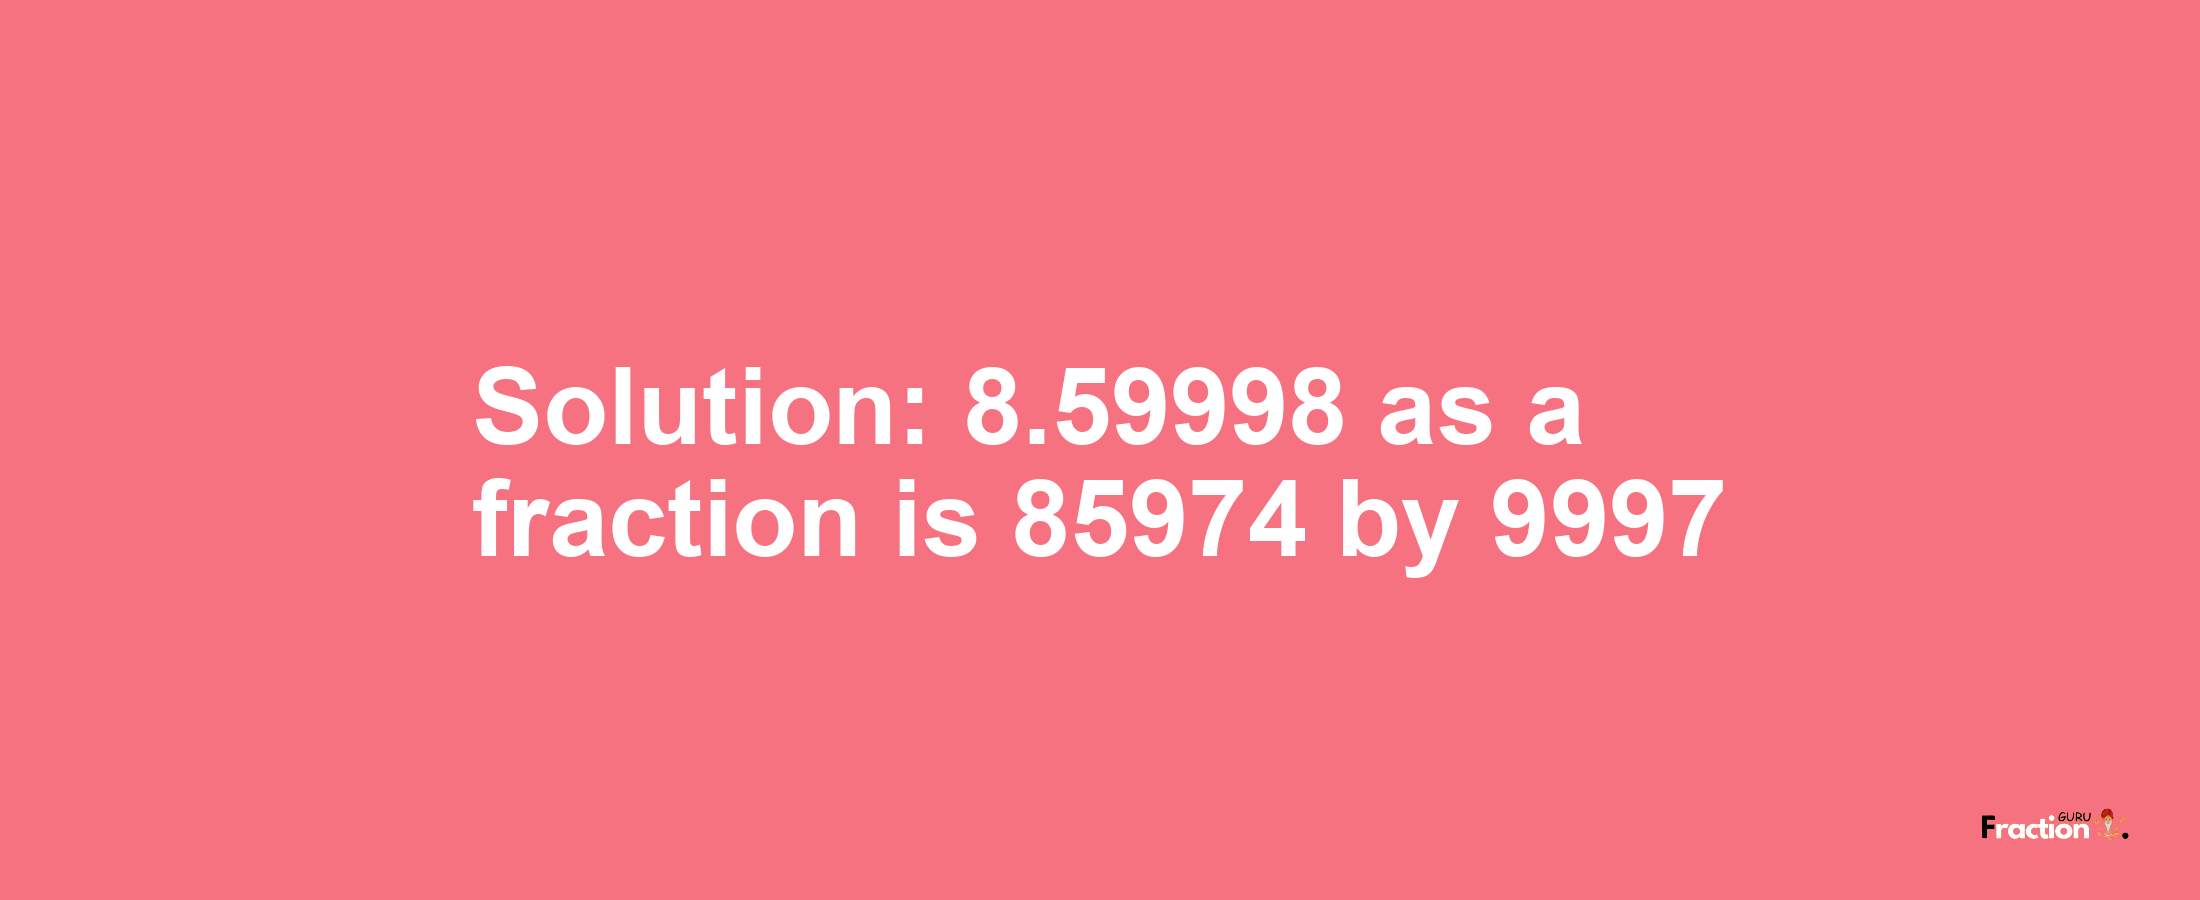 Solution:8.59998 as a fraction is 85974/9997